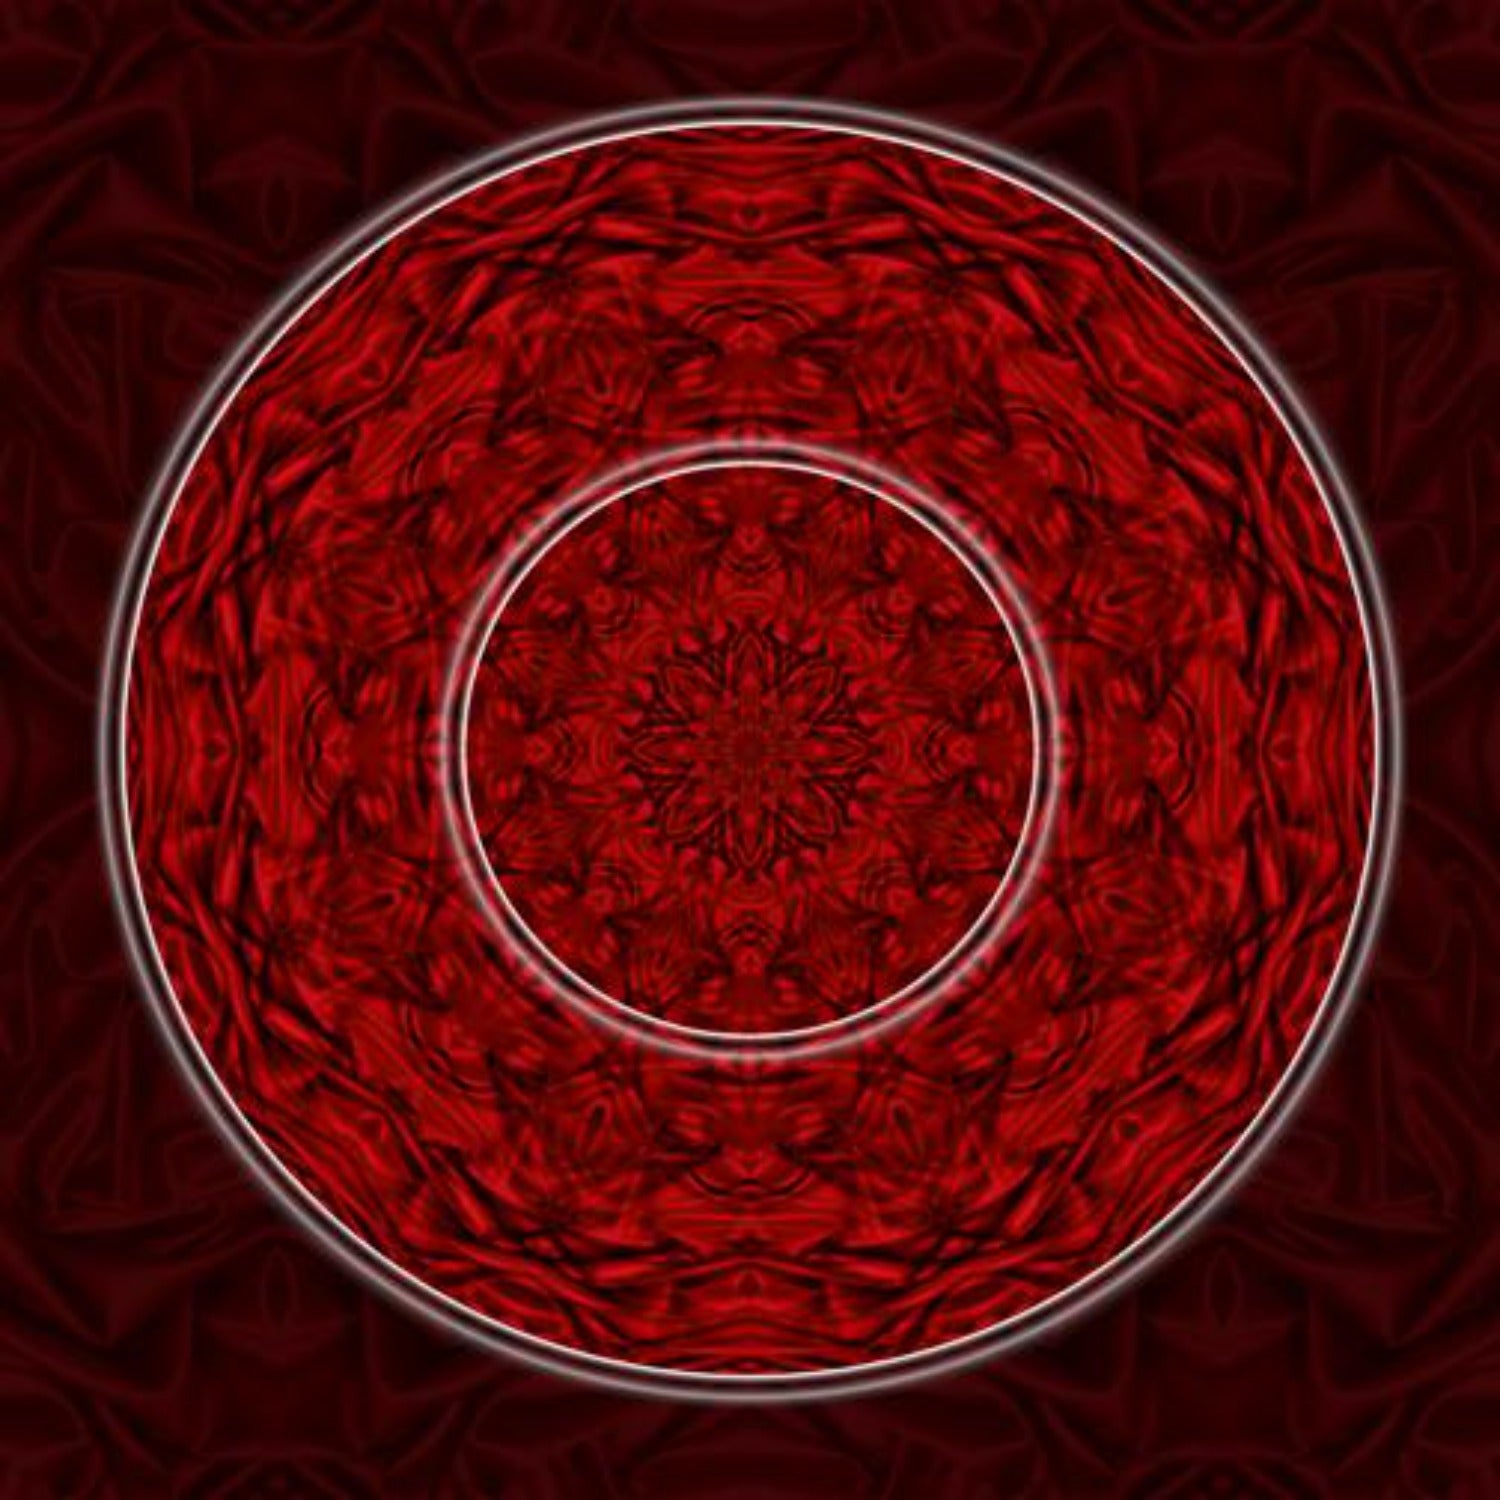 deep red monochrome oculus psychedelic art